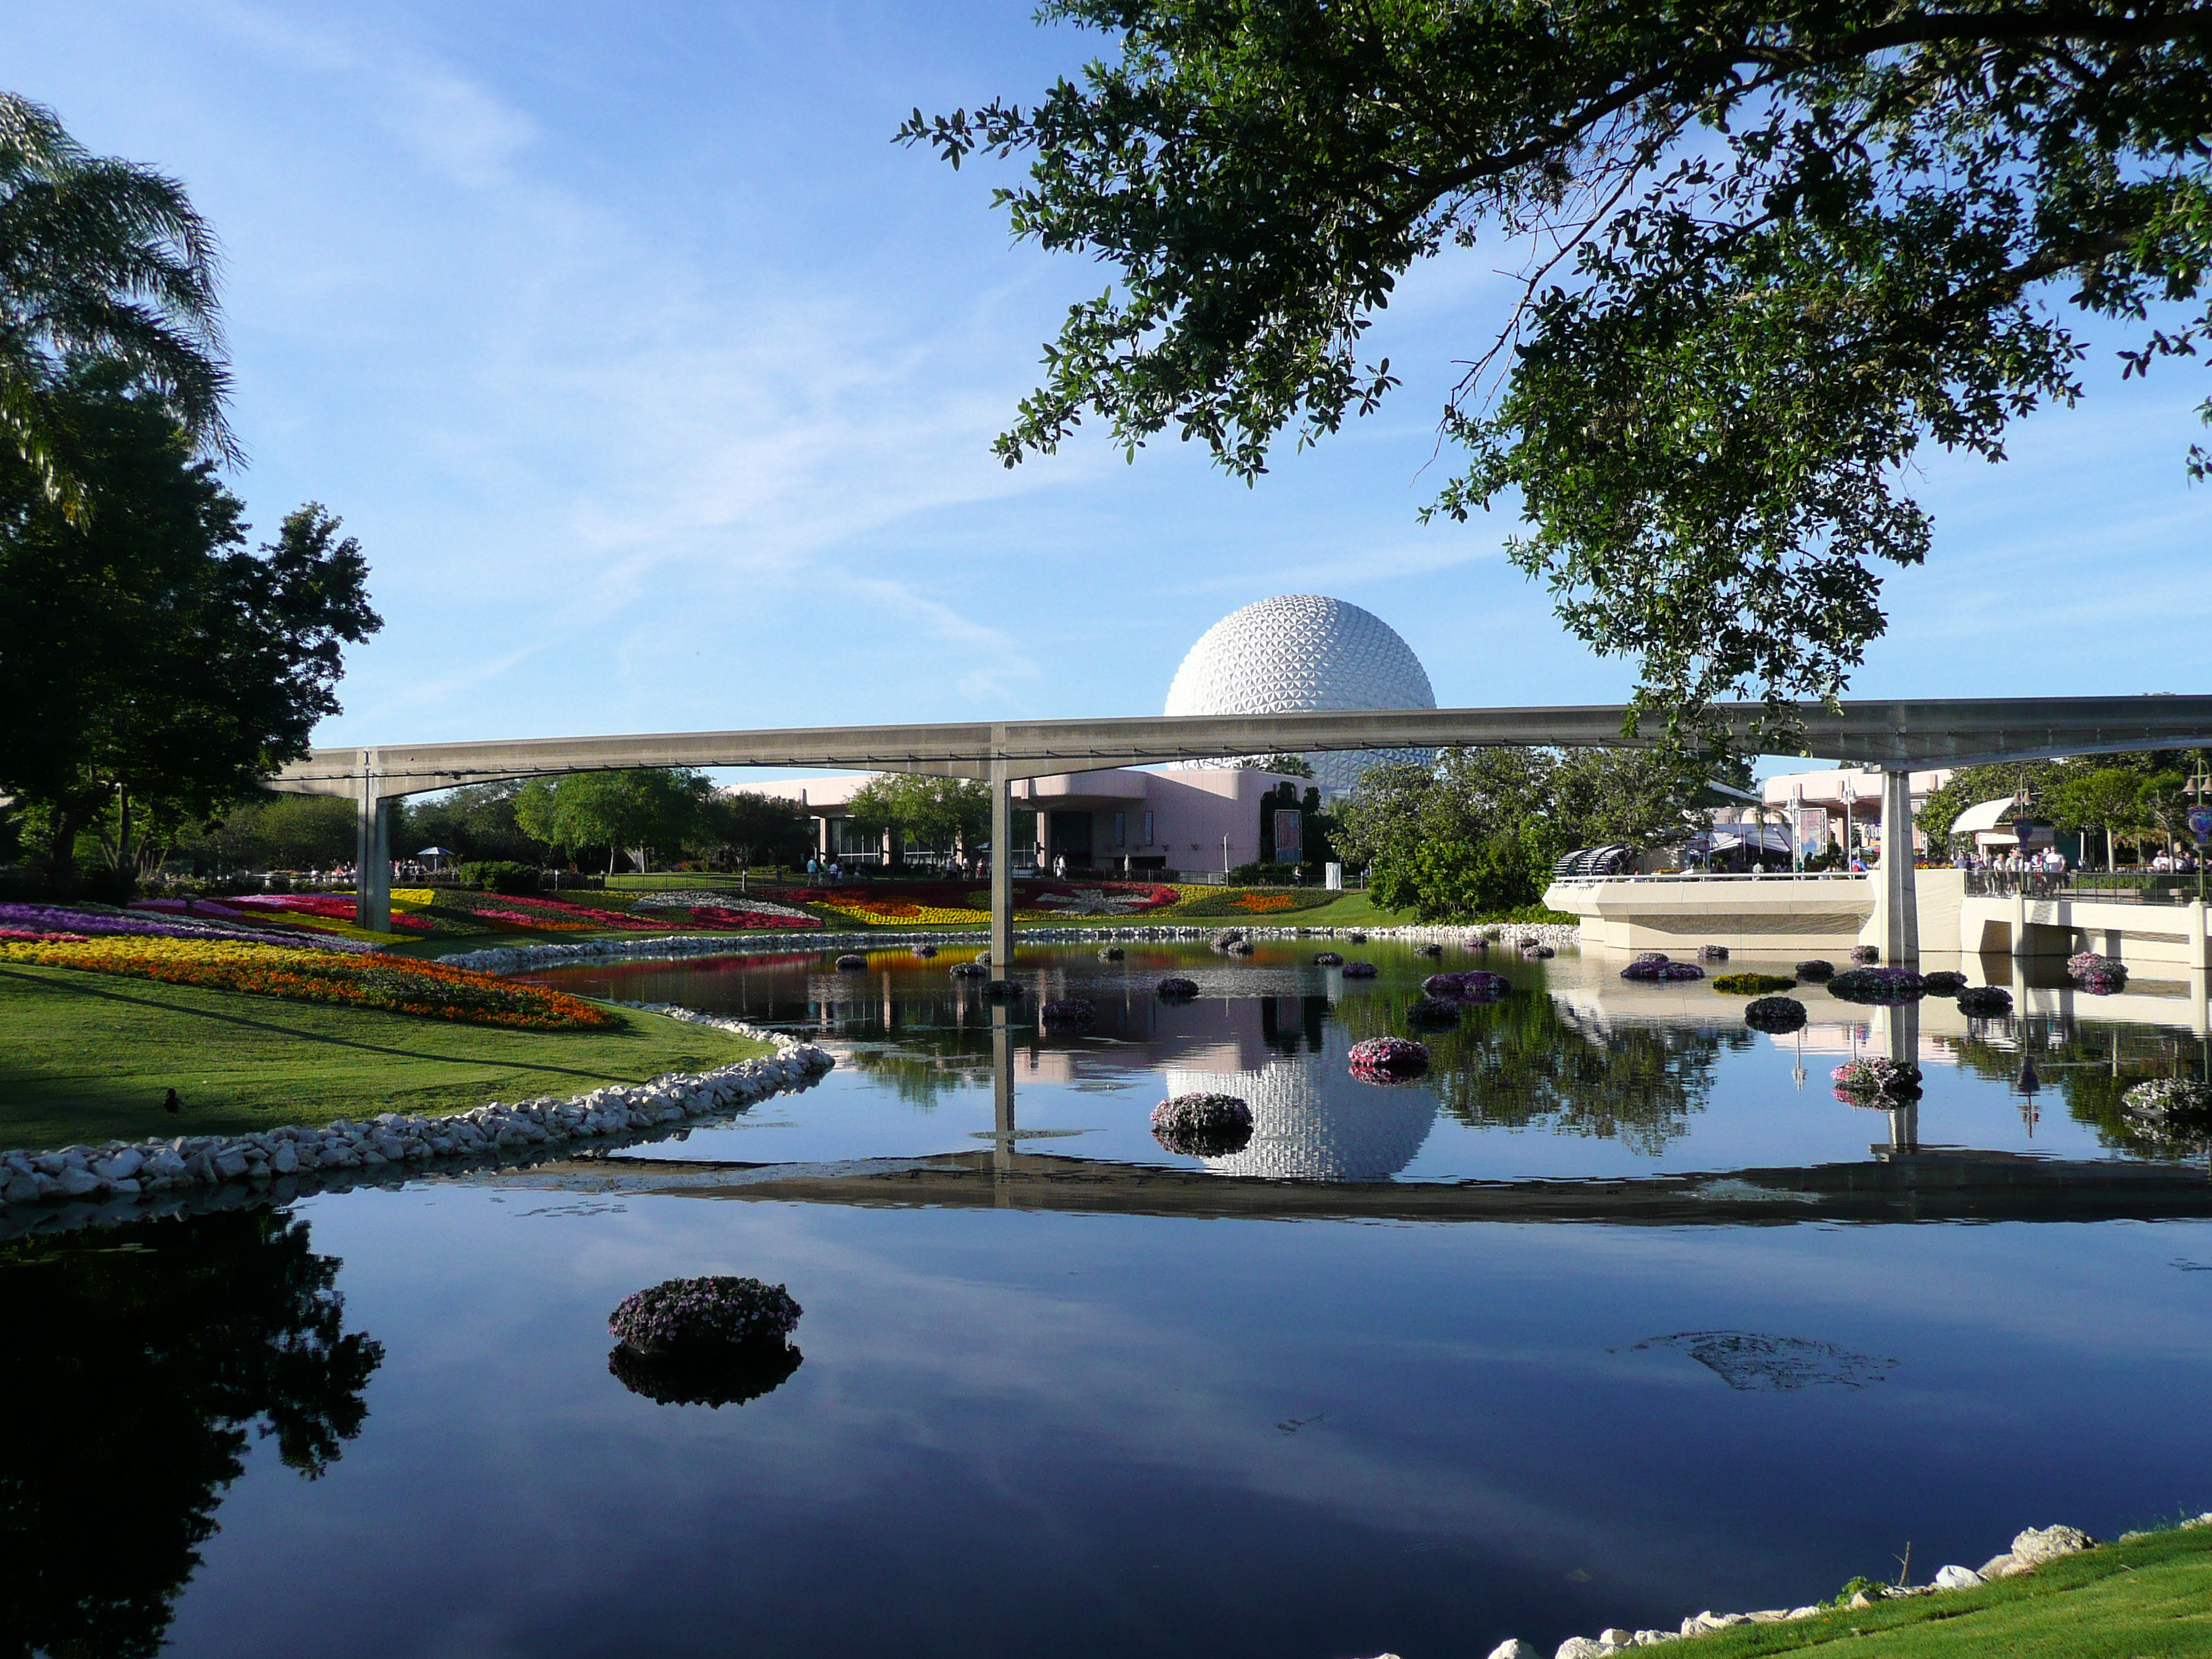 A reflective picture at EPCOT with Spaceship Earth and the monorail track.